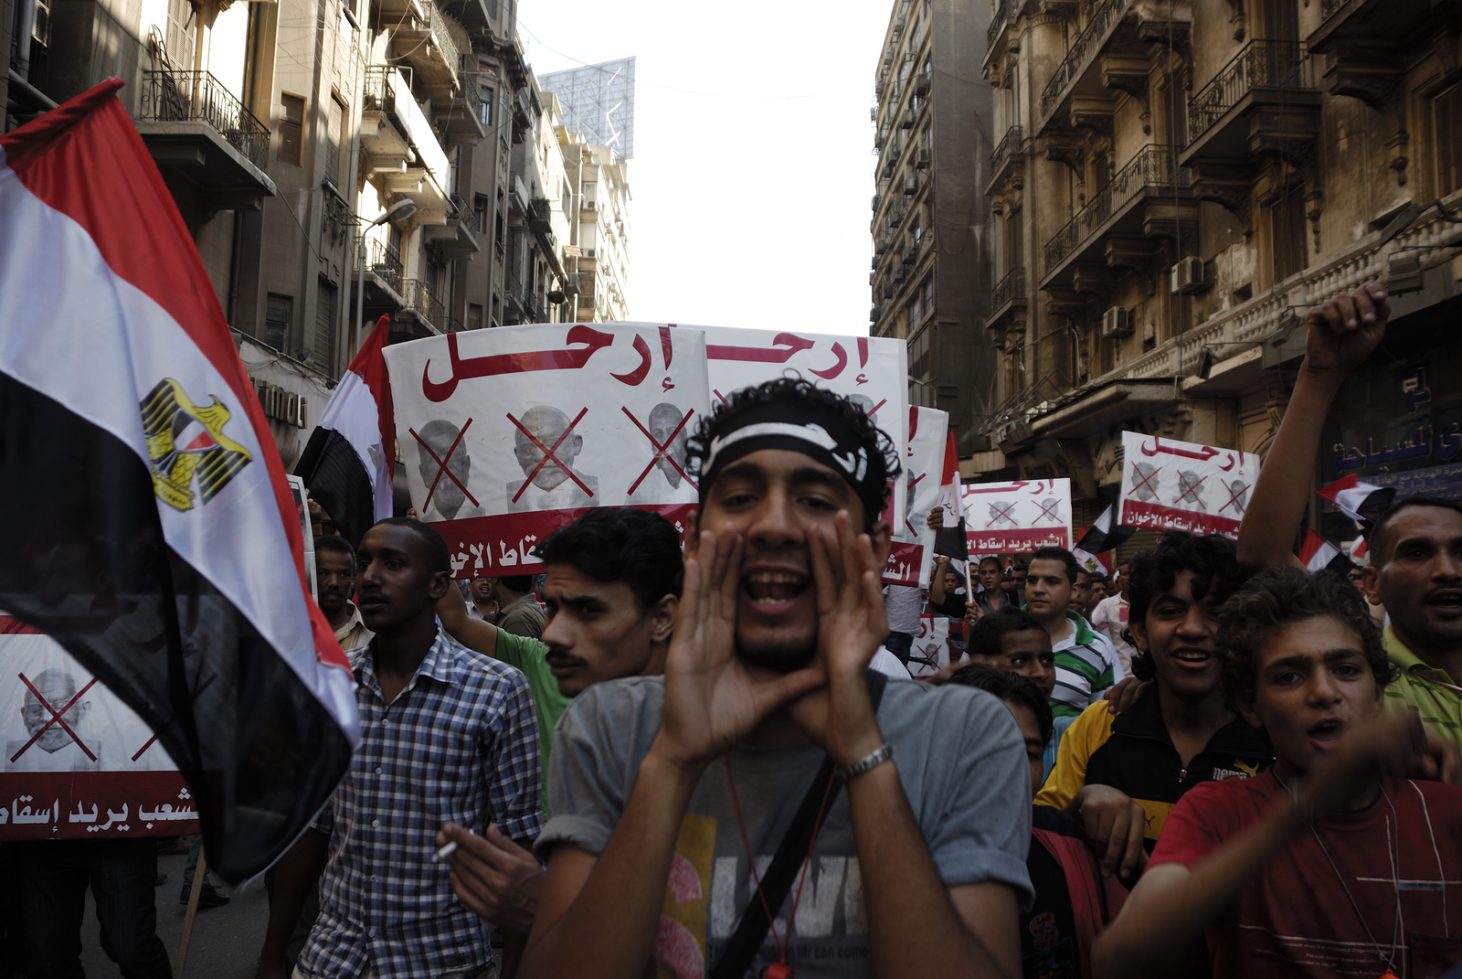 CAIRO - JUNE 30: Unidentified anti Muslim Brotherhood/Morsi protesters in Tahrir Square shout slogans calling for Morsi's resignation on June 30 2013 in Cairo Egypt.